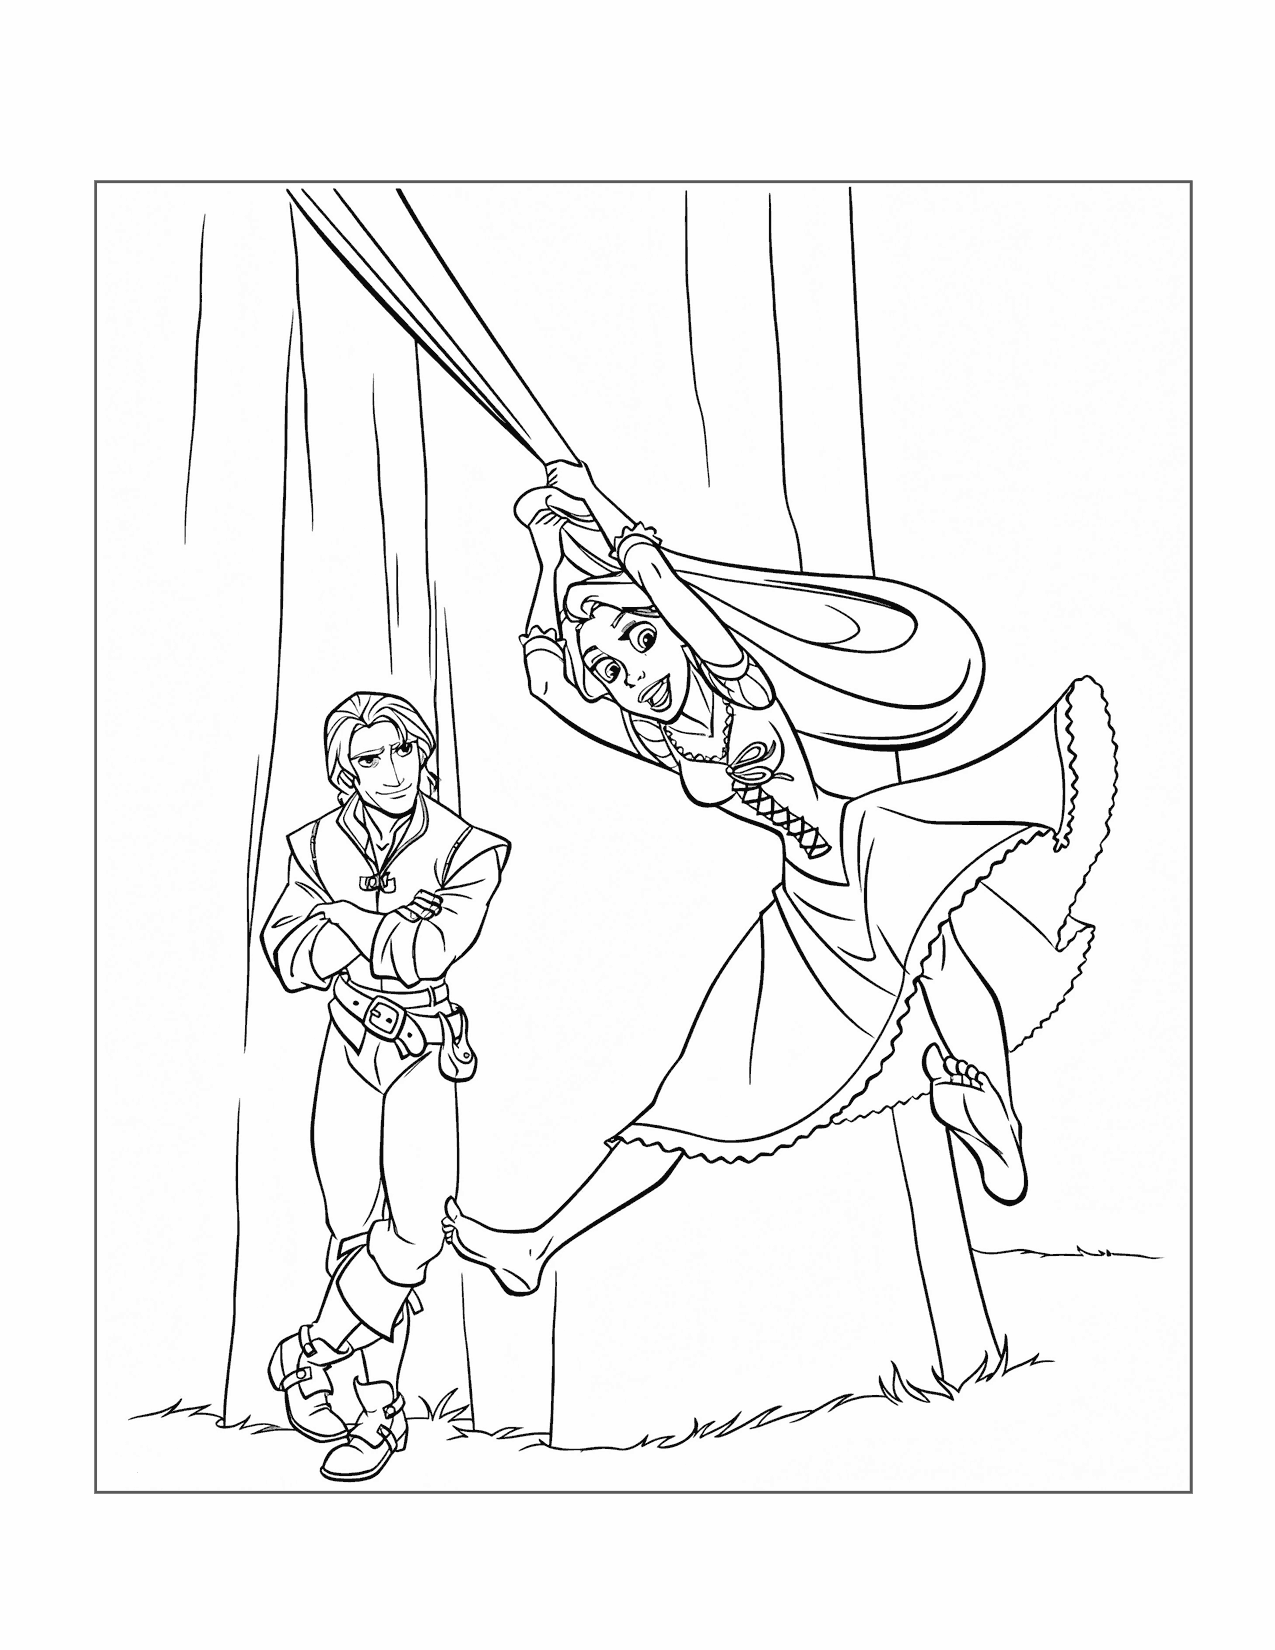 Rapunzel Is Free Coloring Page